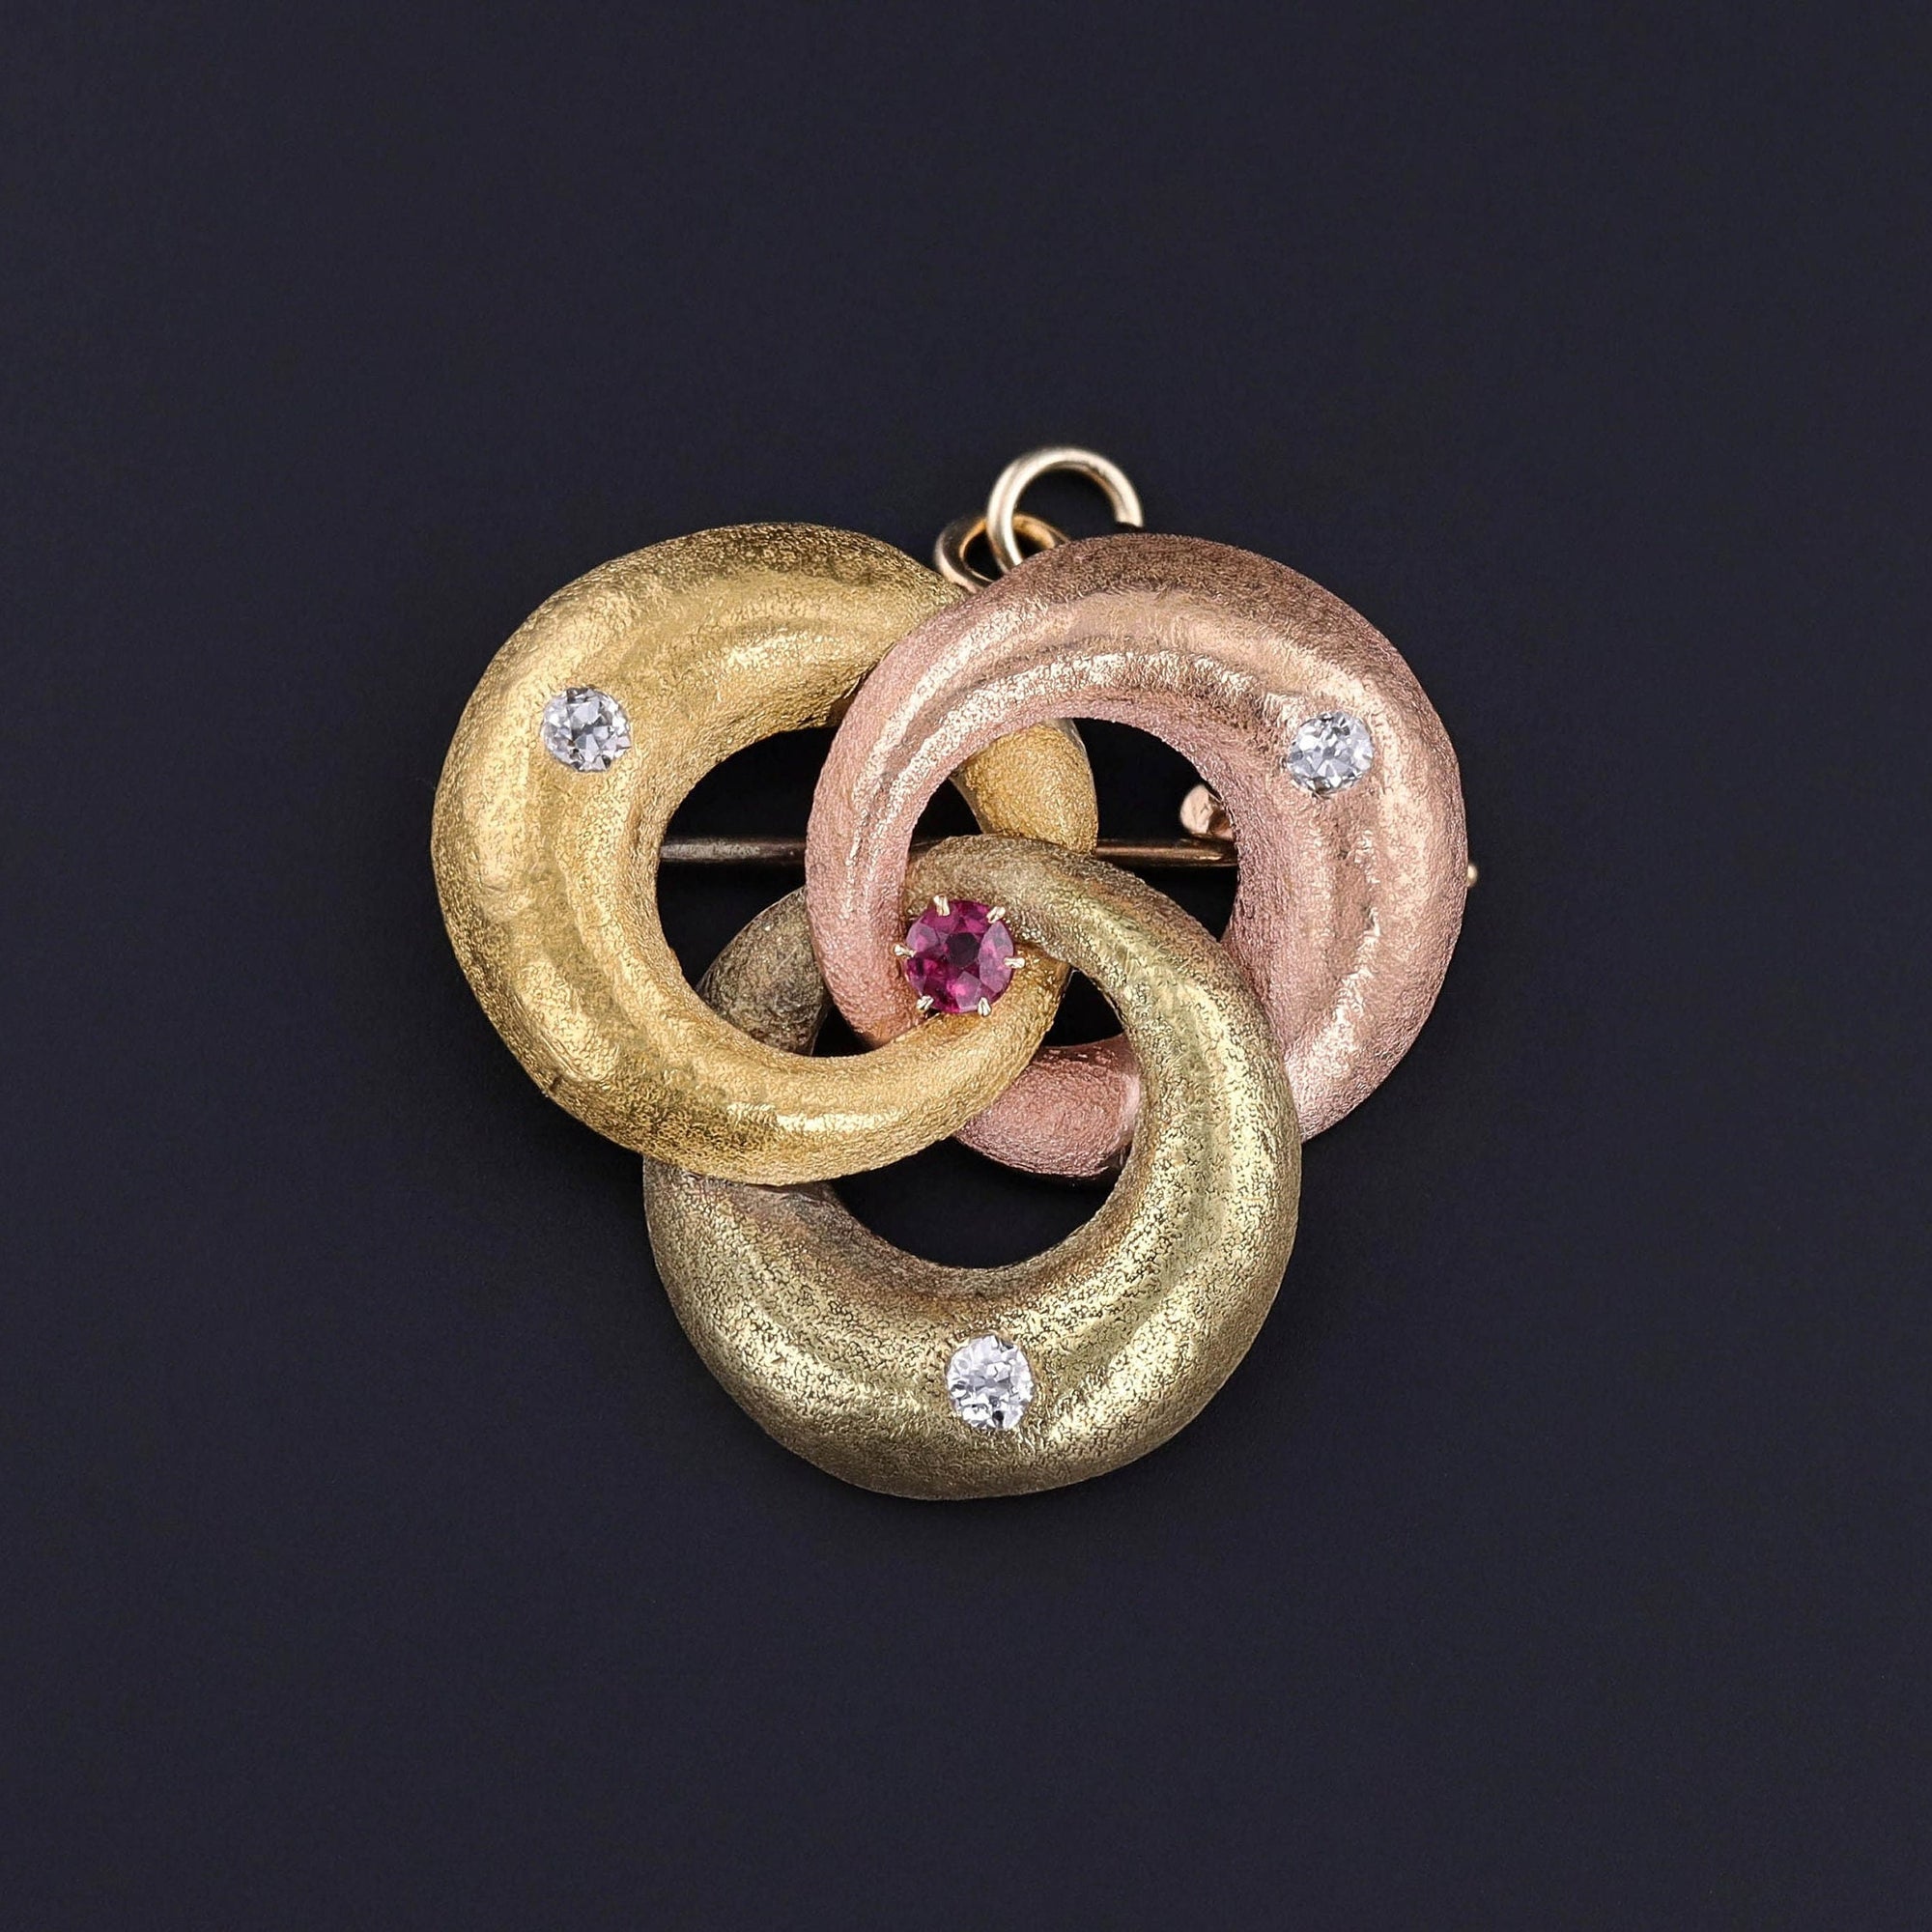 Antique Love Knot Pendant Brooch of Tri Color Gold